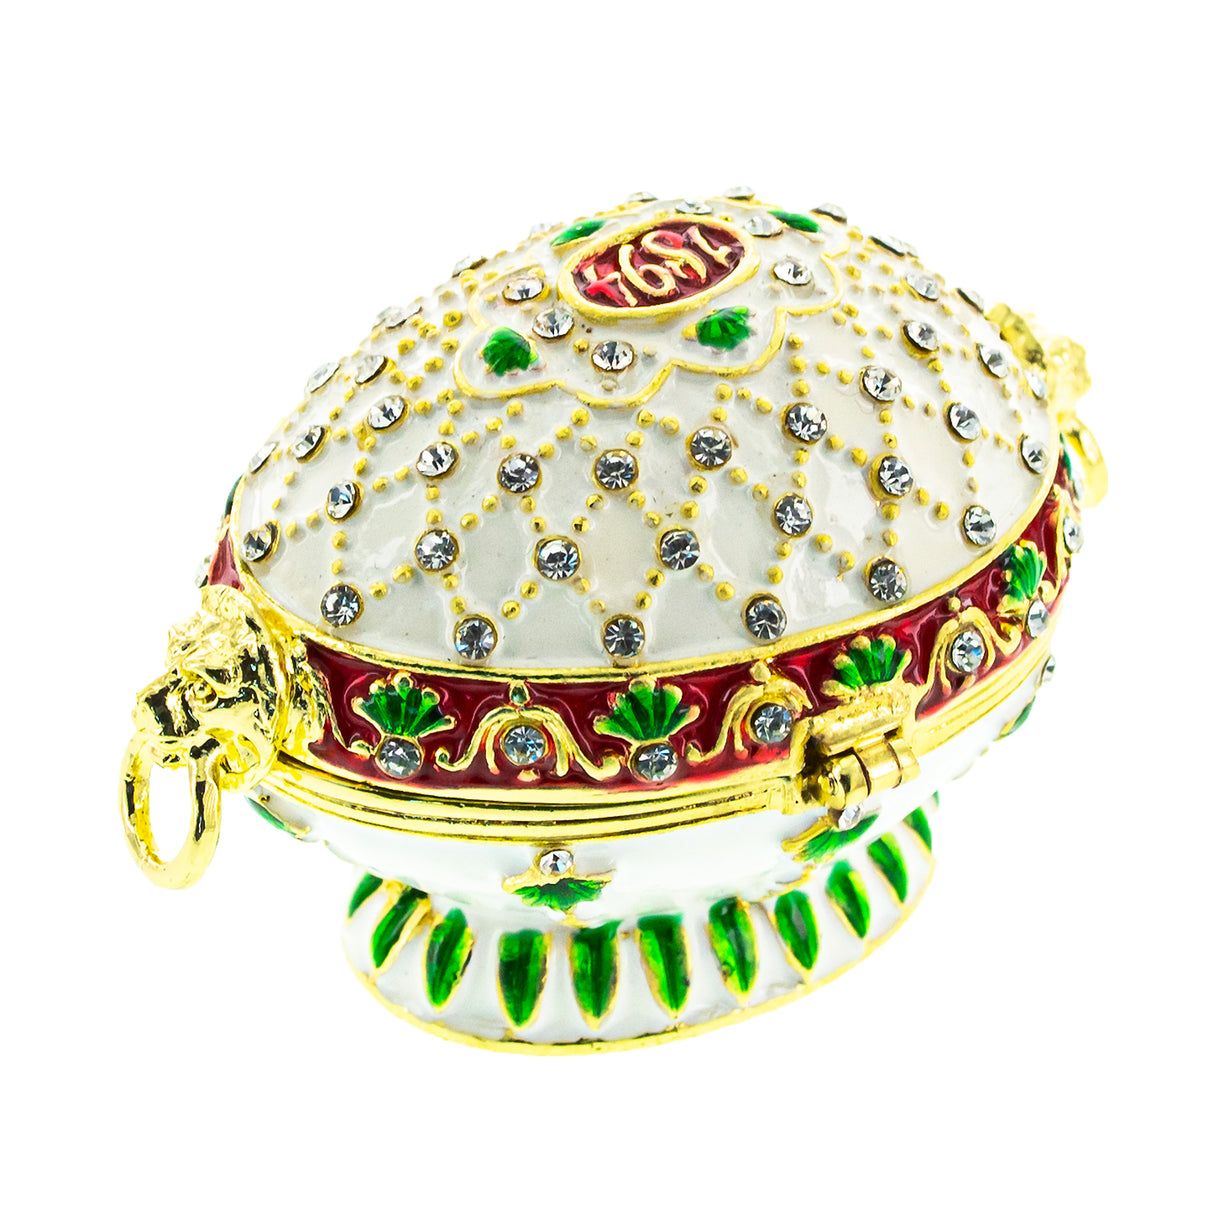 BestPysanky online gift shop sells Faberge replicas Imperial royal collectible Easter egg decorative Russian inspired style jewelry trinket box bejeweled jeweled enameled decoration figurine collection house music box crystal value for sale real